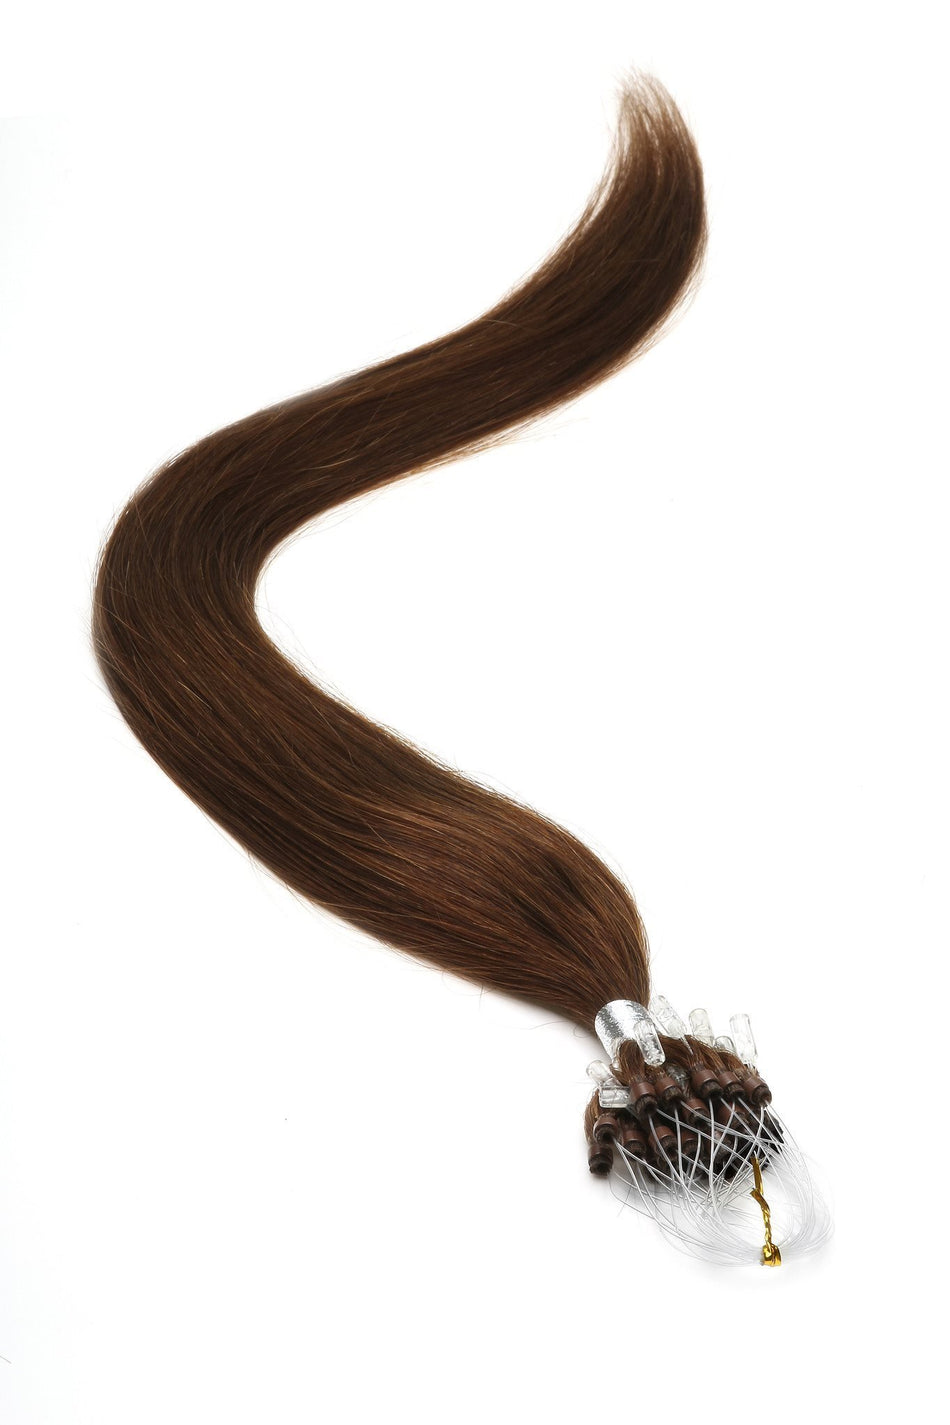 Micro Ring Hair Extensions | 22 inch Brown (4) - Beauty Hair Products LtdHair Extensions